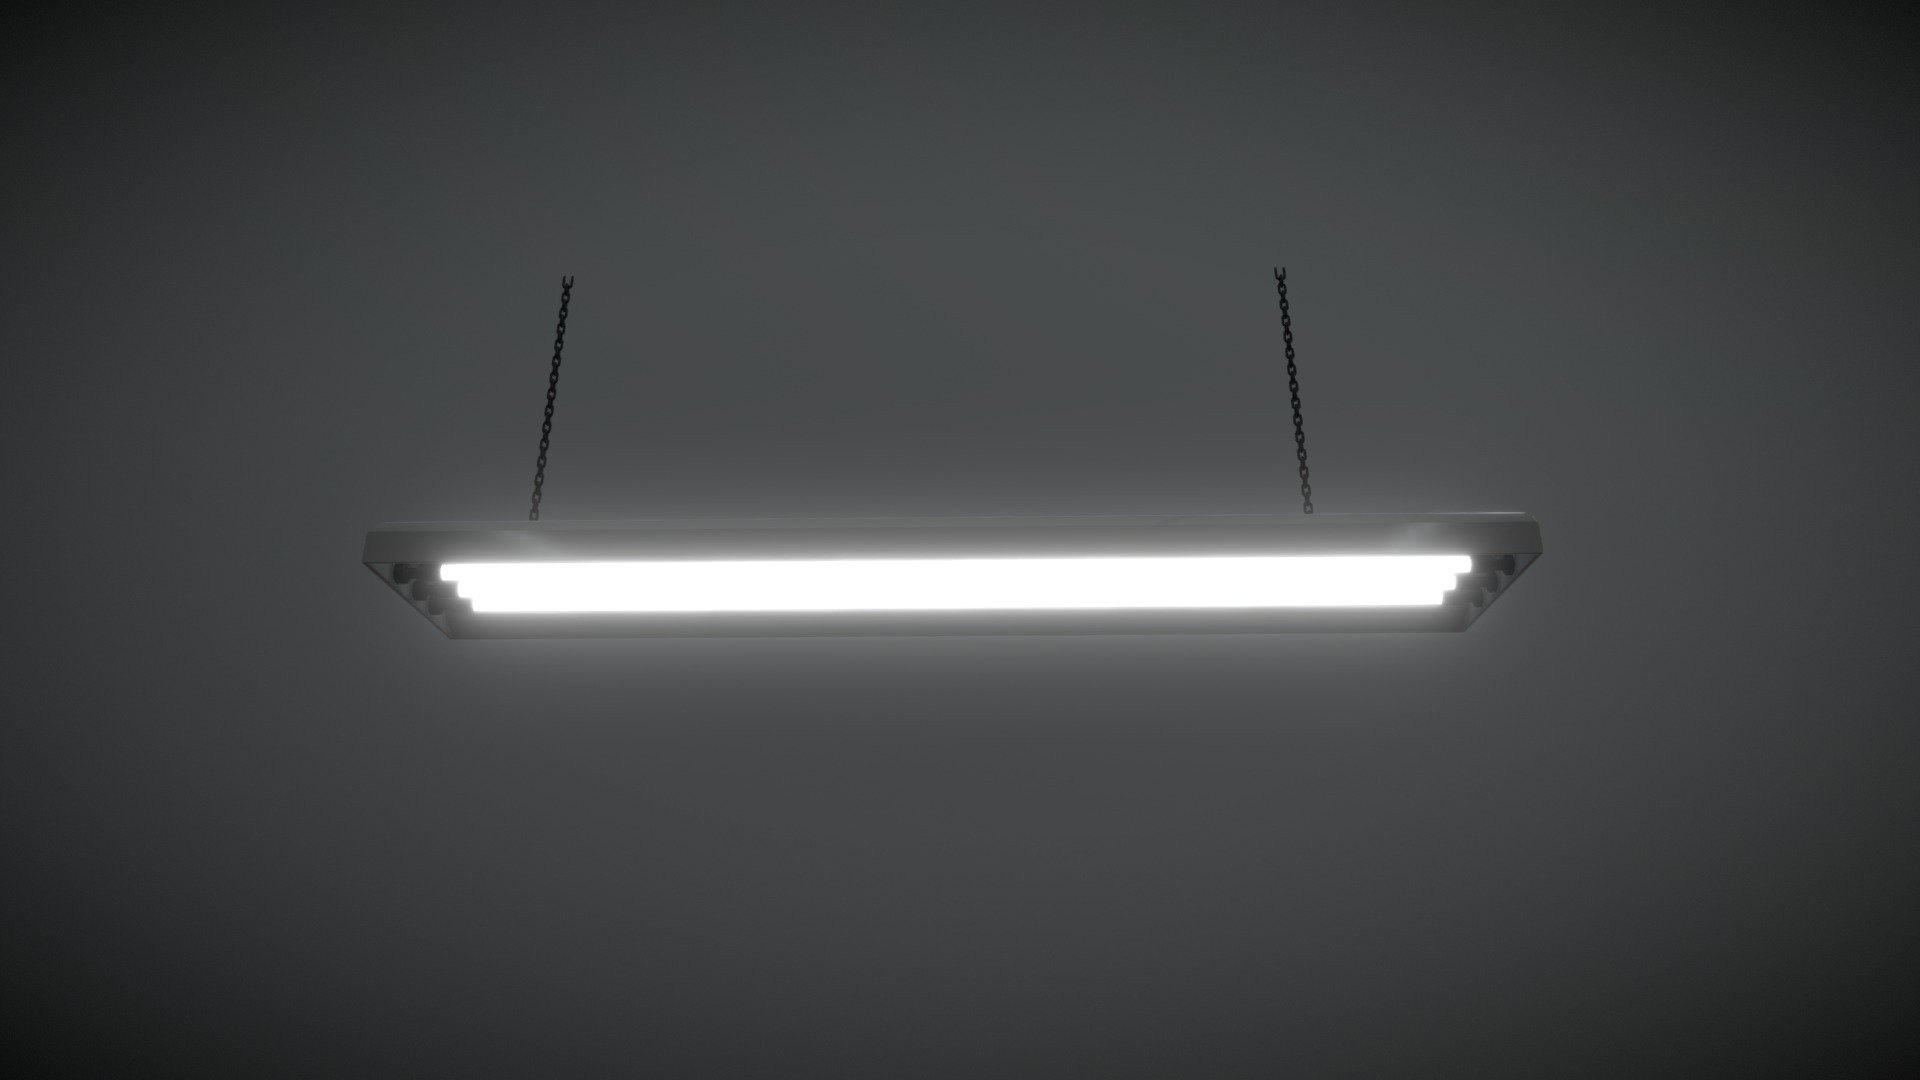 Hanging warehouse light for the game I am working on for my thesis - Hanging Light - 3D model by mwltu 3d model